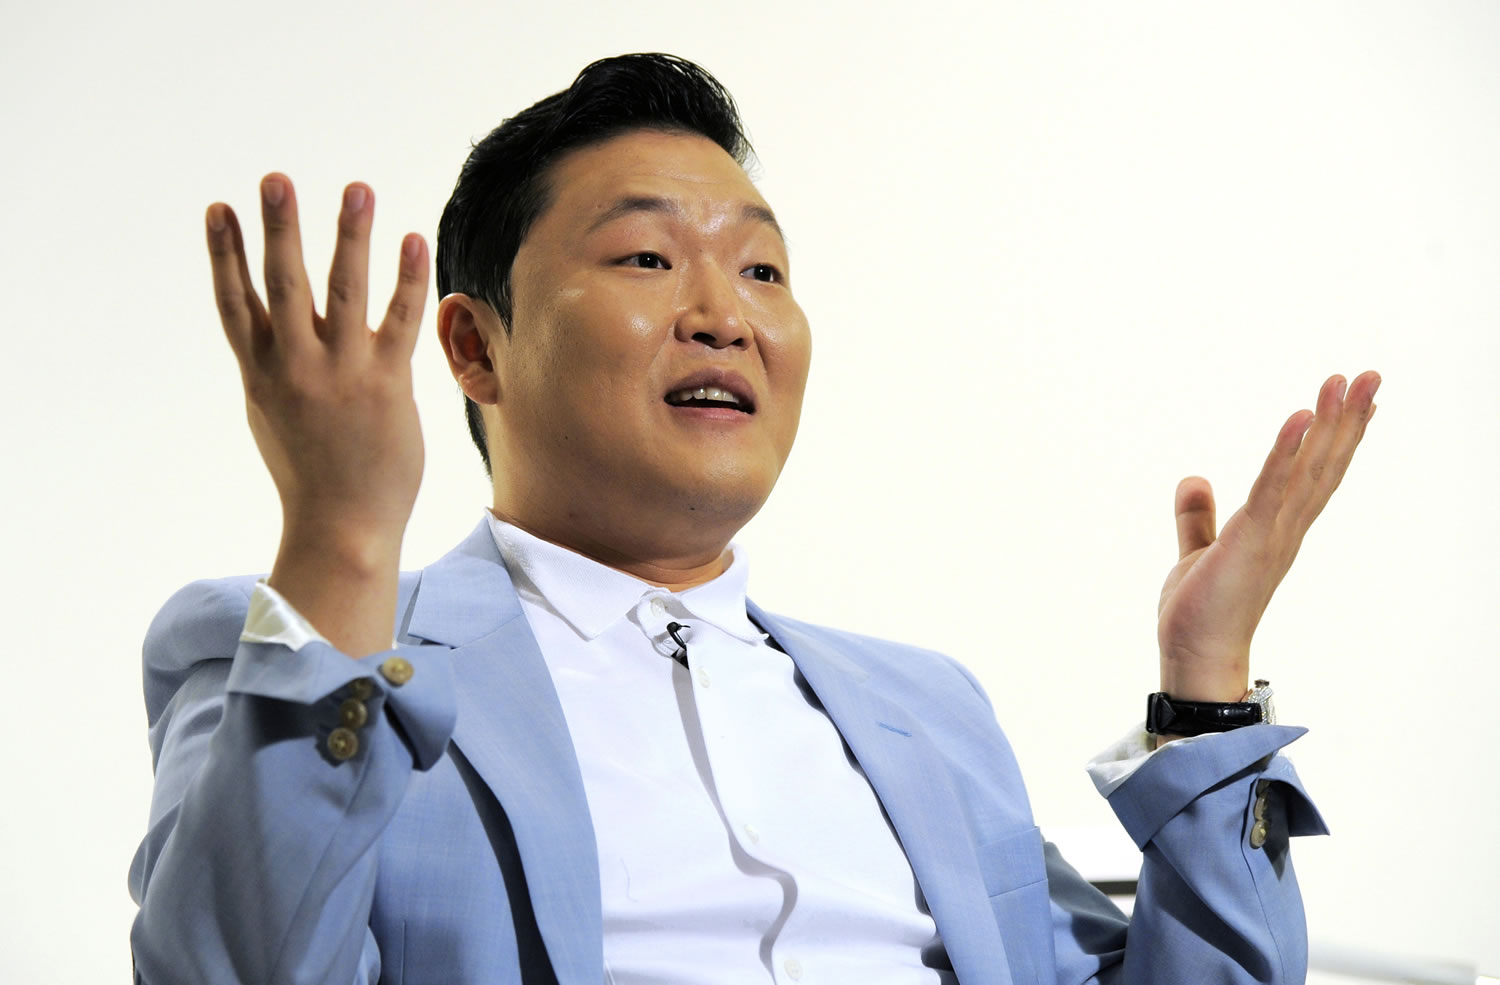 The ubiquitous 2012 hit is one South Korean singer Psy knows he probably will never top, and that makes creating new music quite a challenge.